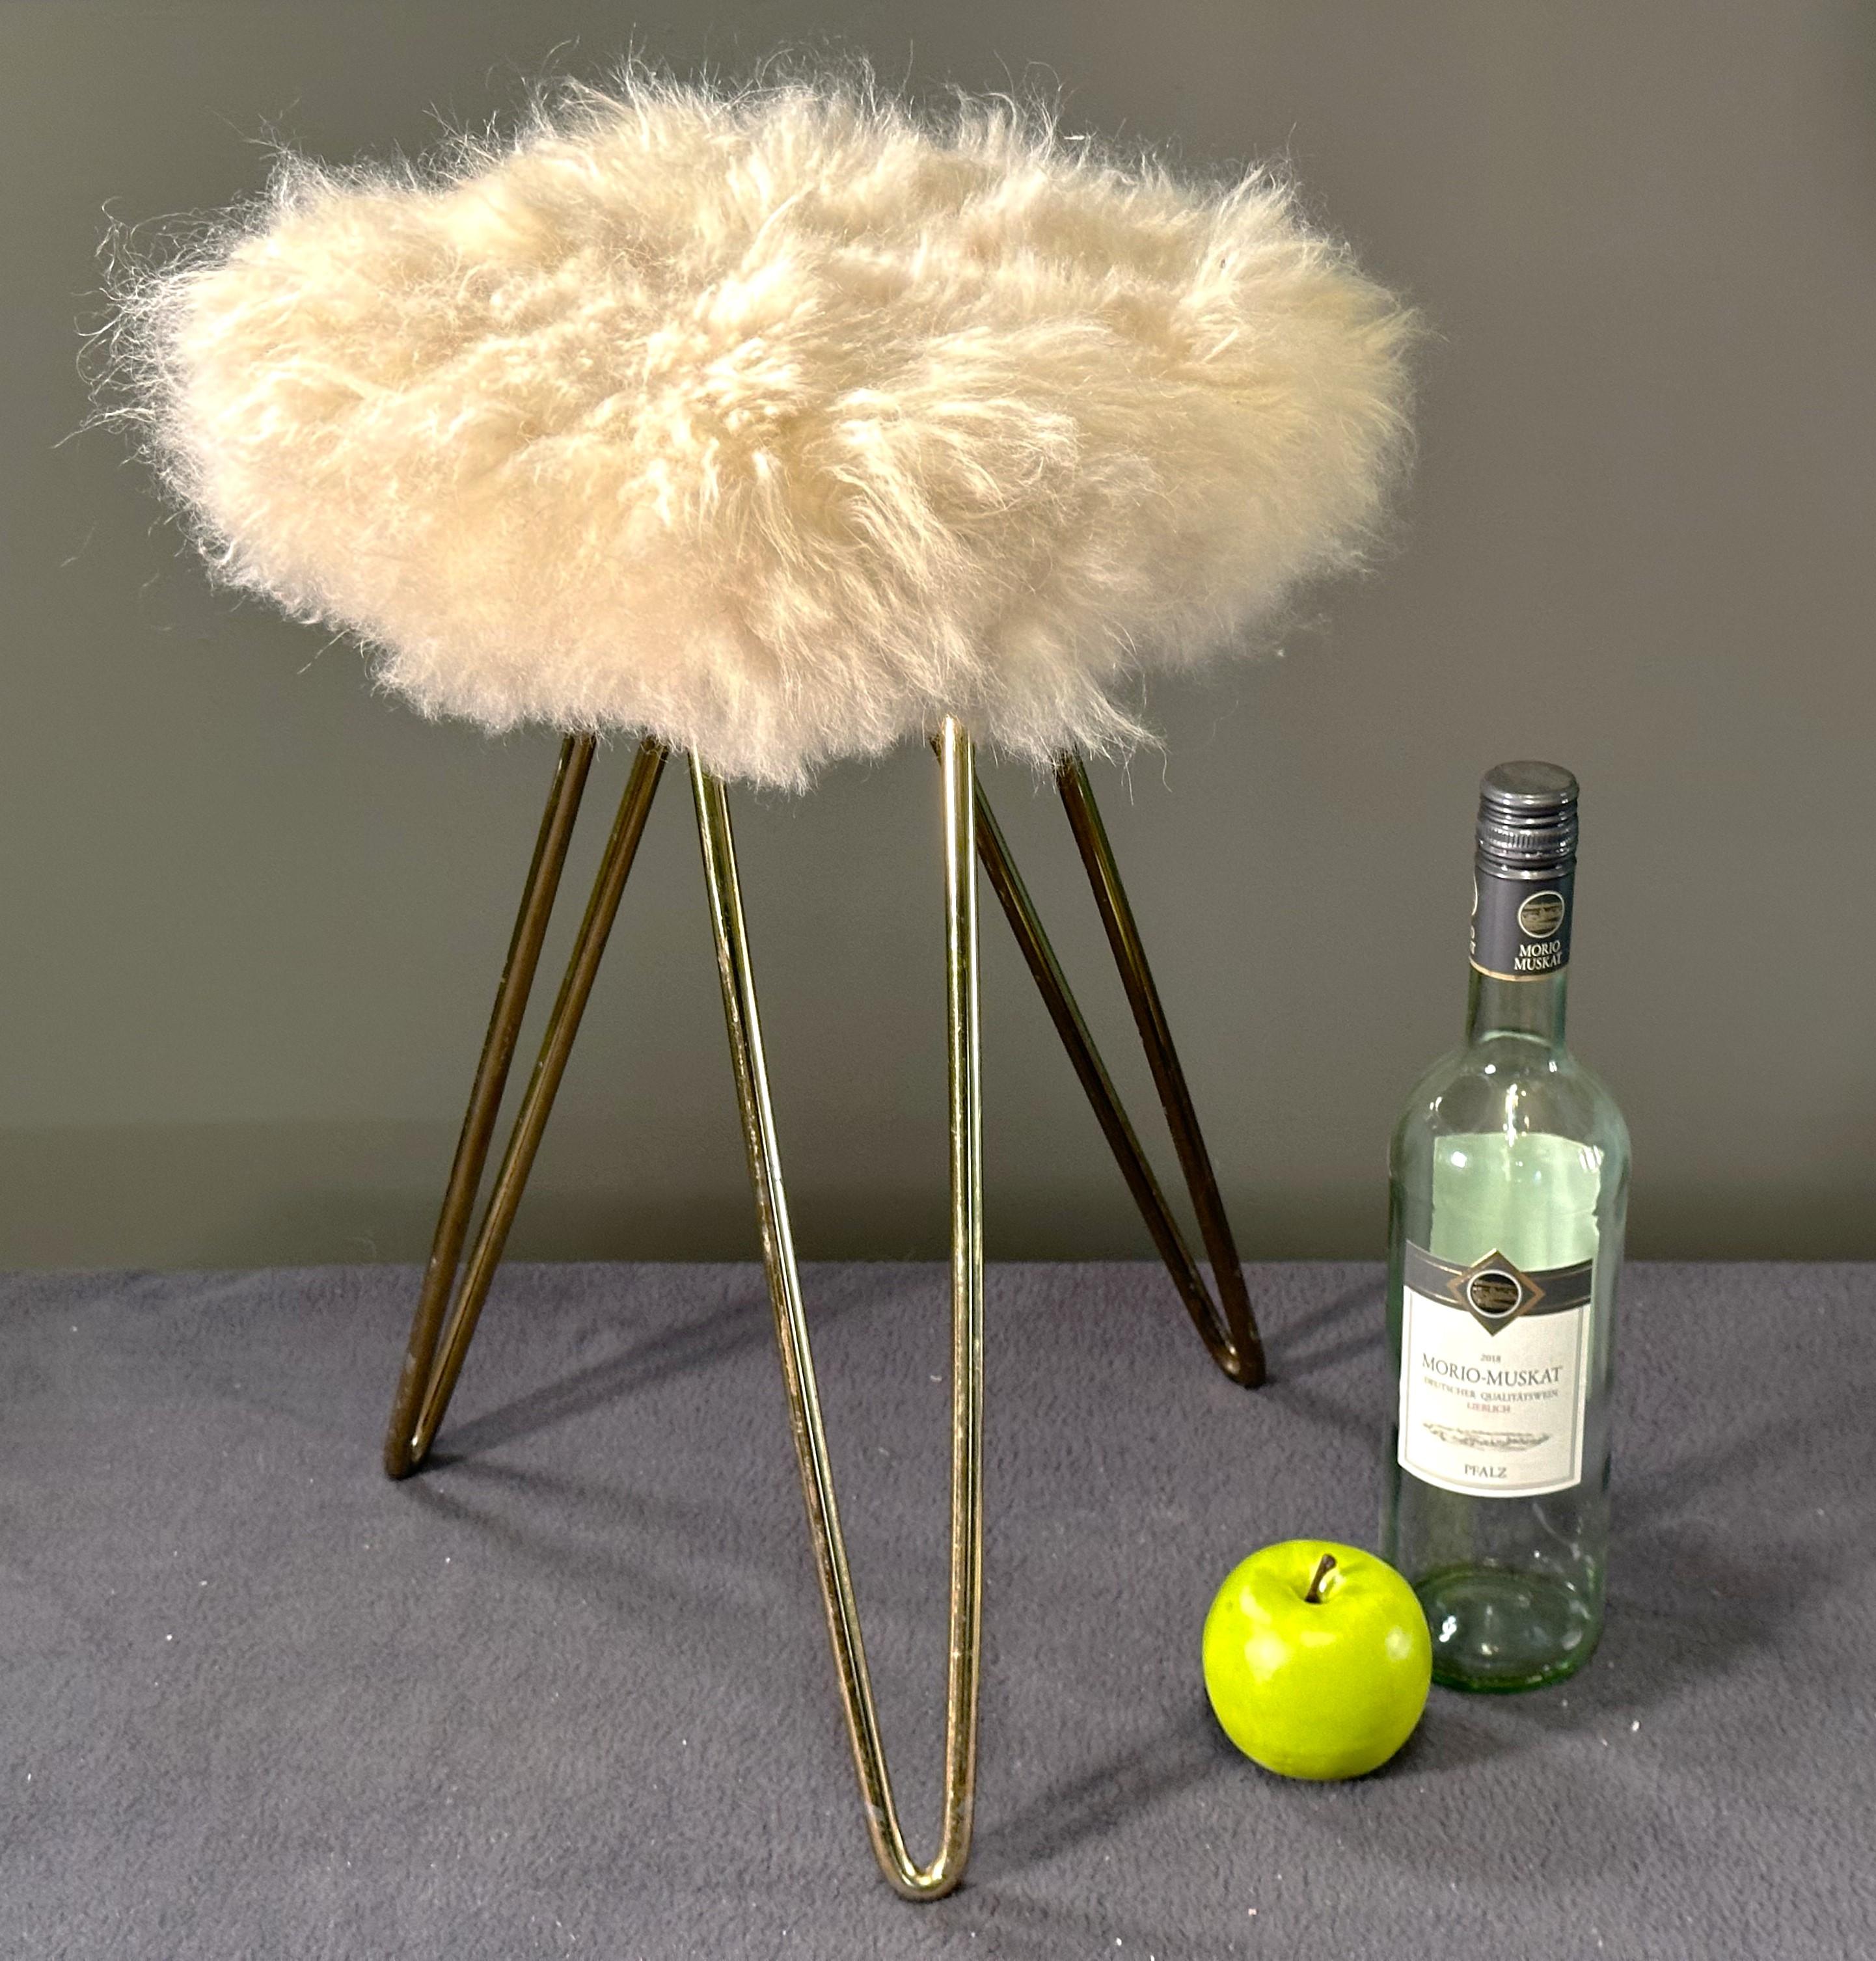 Mid-Century Hairpin Legs Fur Stool, 1950s, France.
solid and stable.
faux fur cleaned.